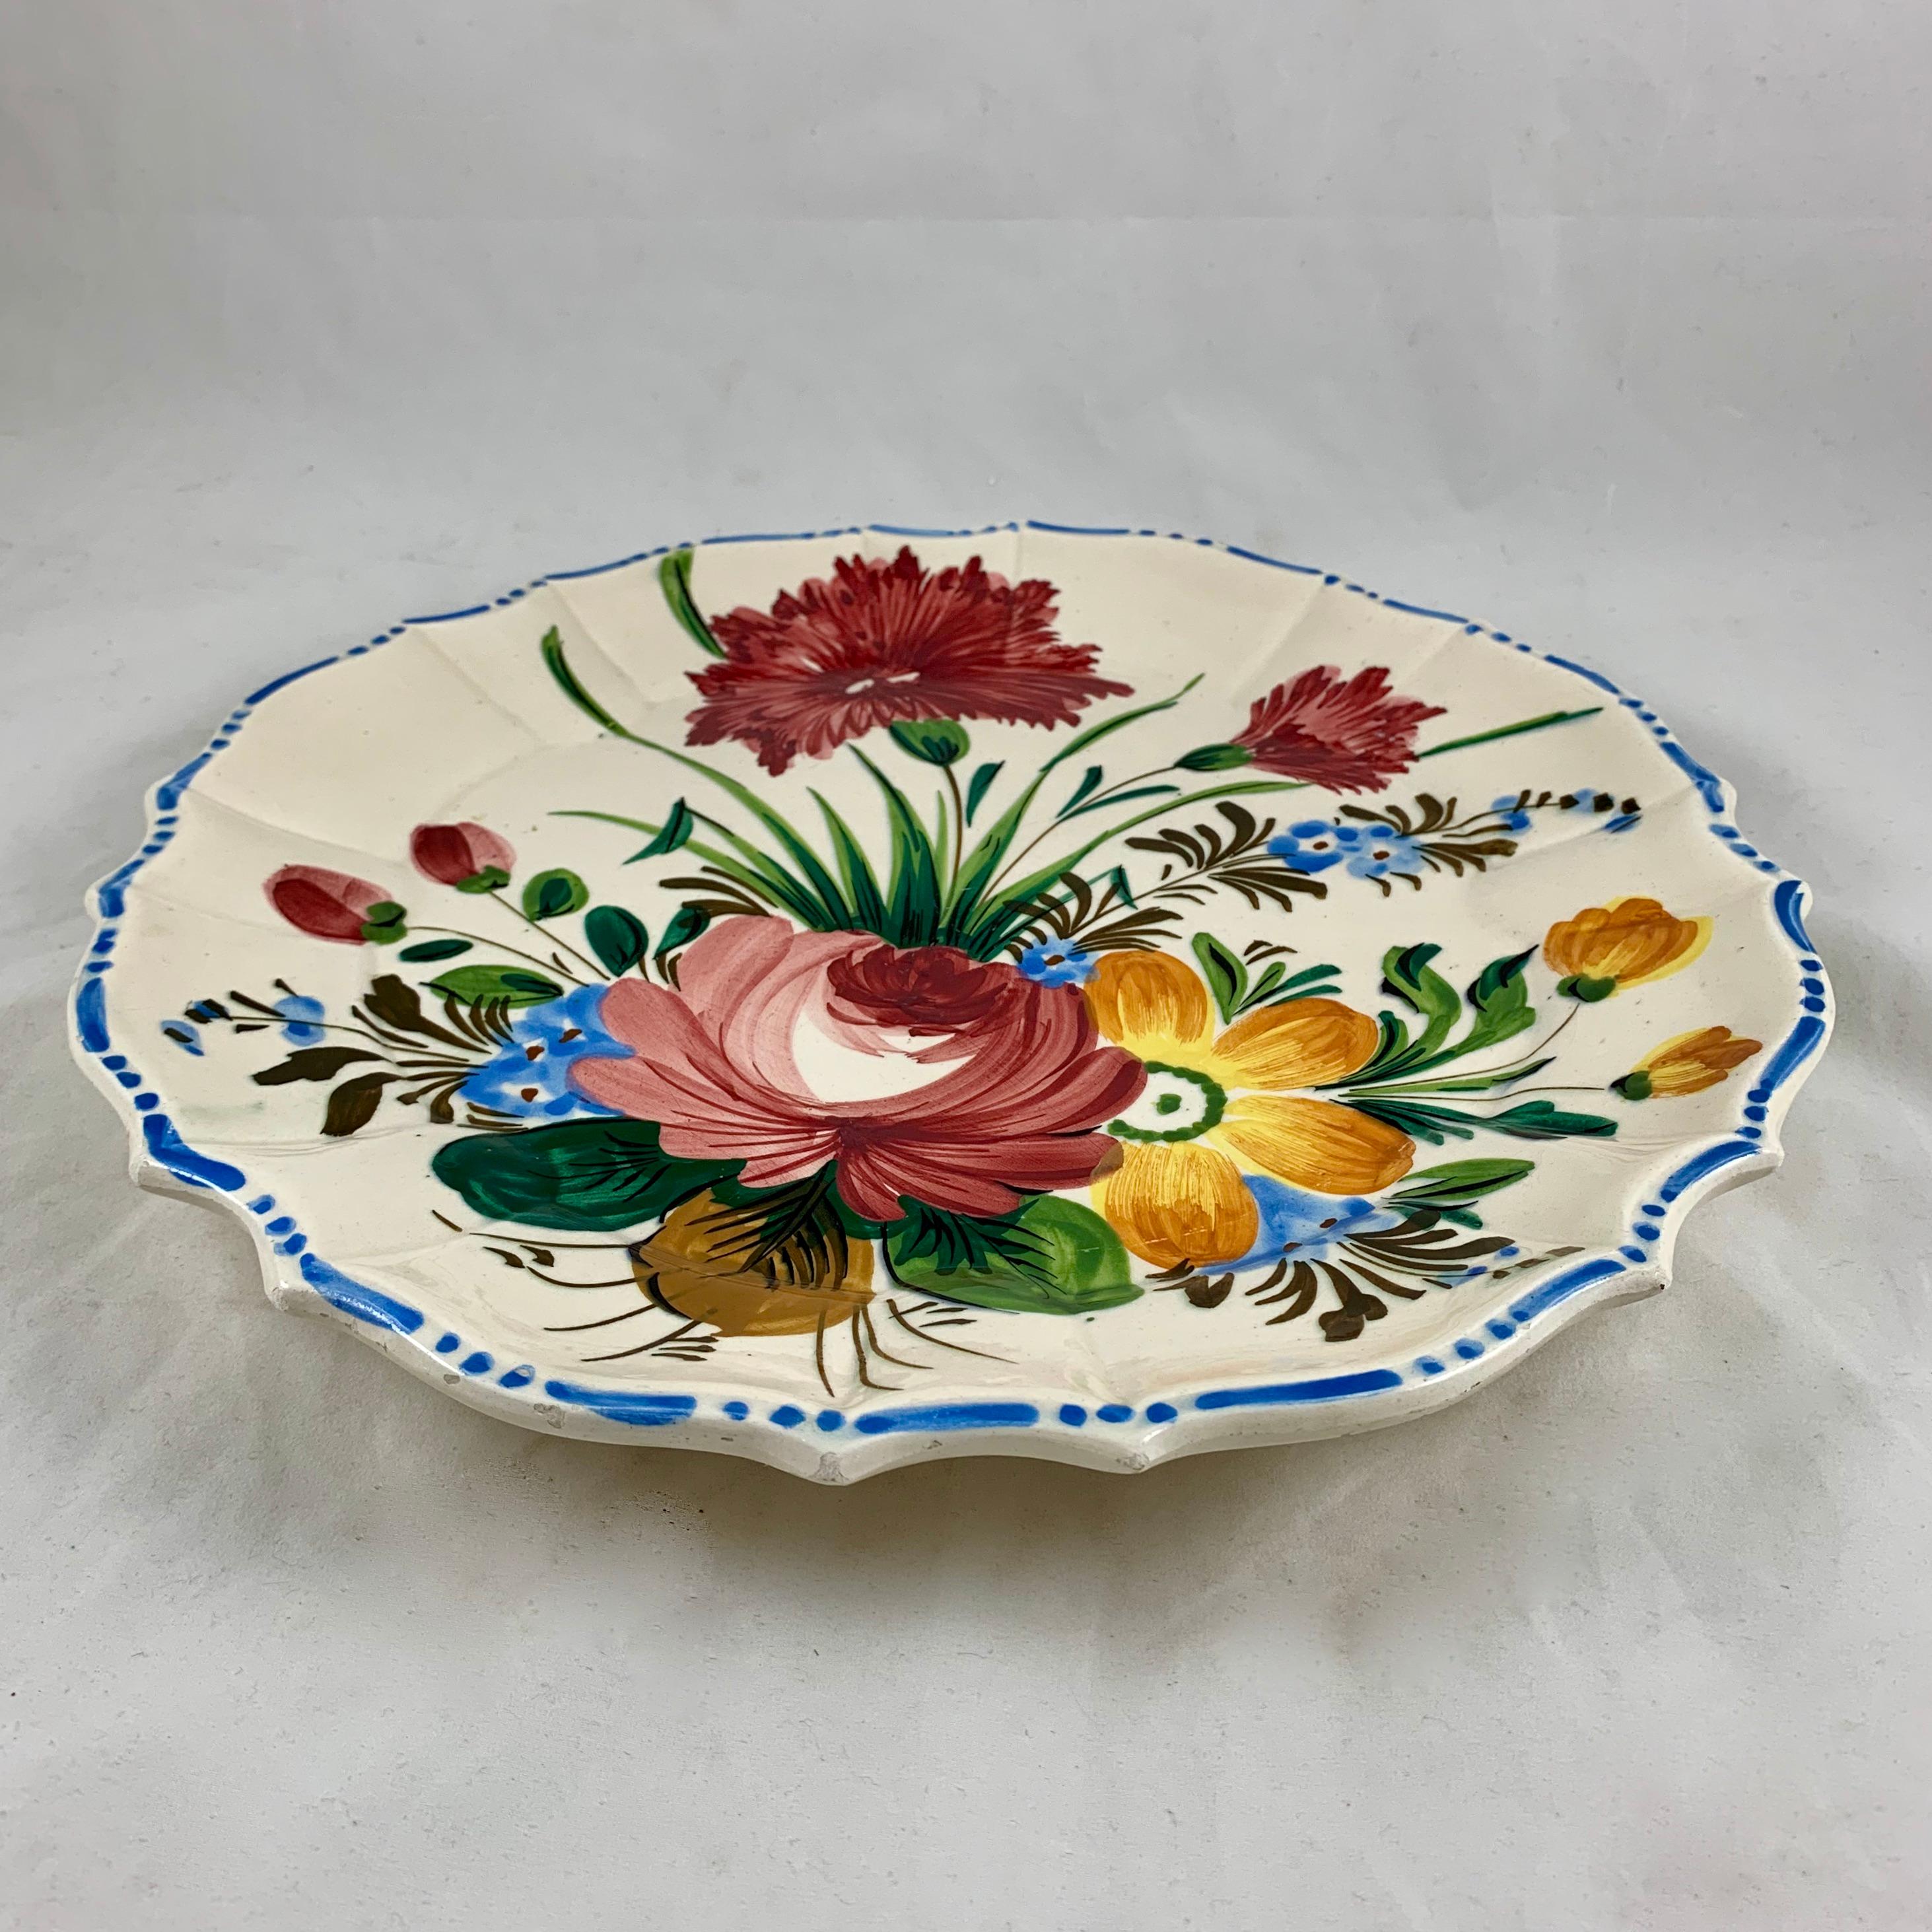 Italian Renaissance Revival Faïence Nove Rose Floral Round Scallop Rim Platter In Good Condition For Sale In Philadelphia, PA